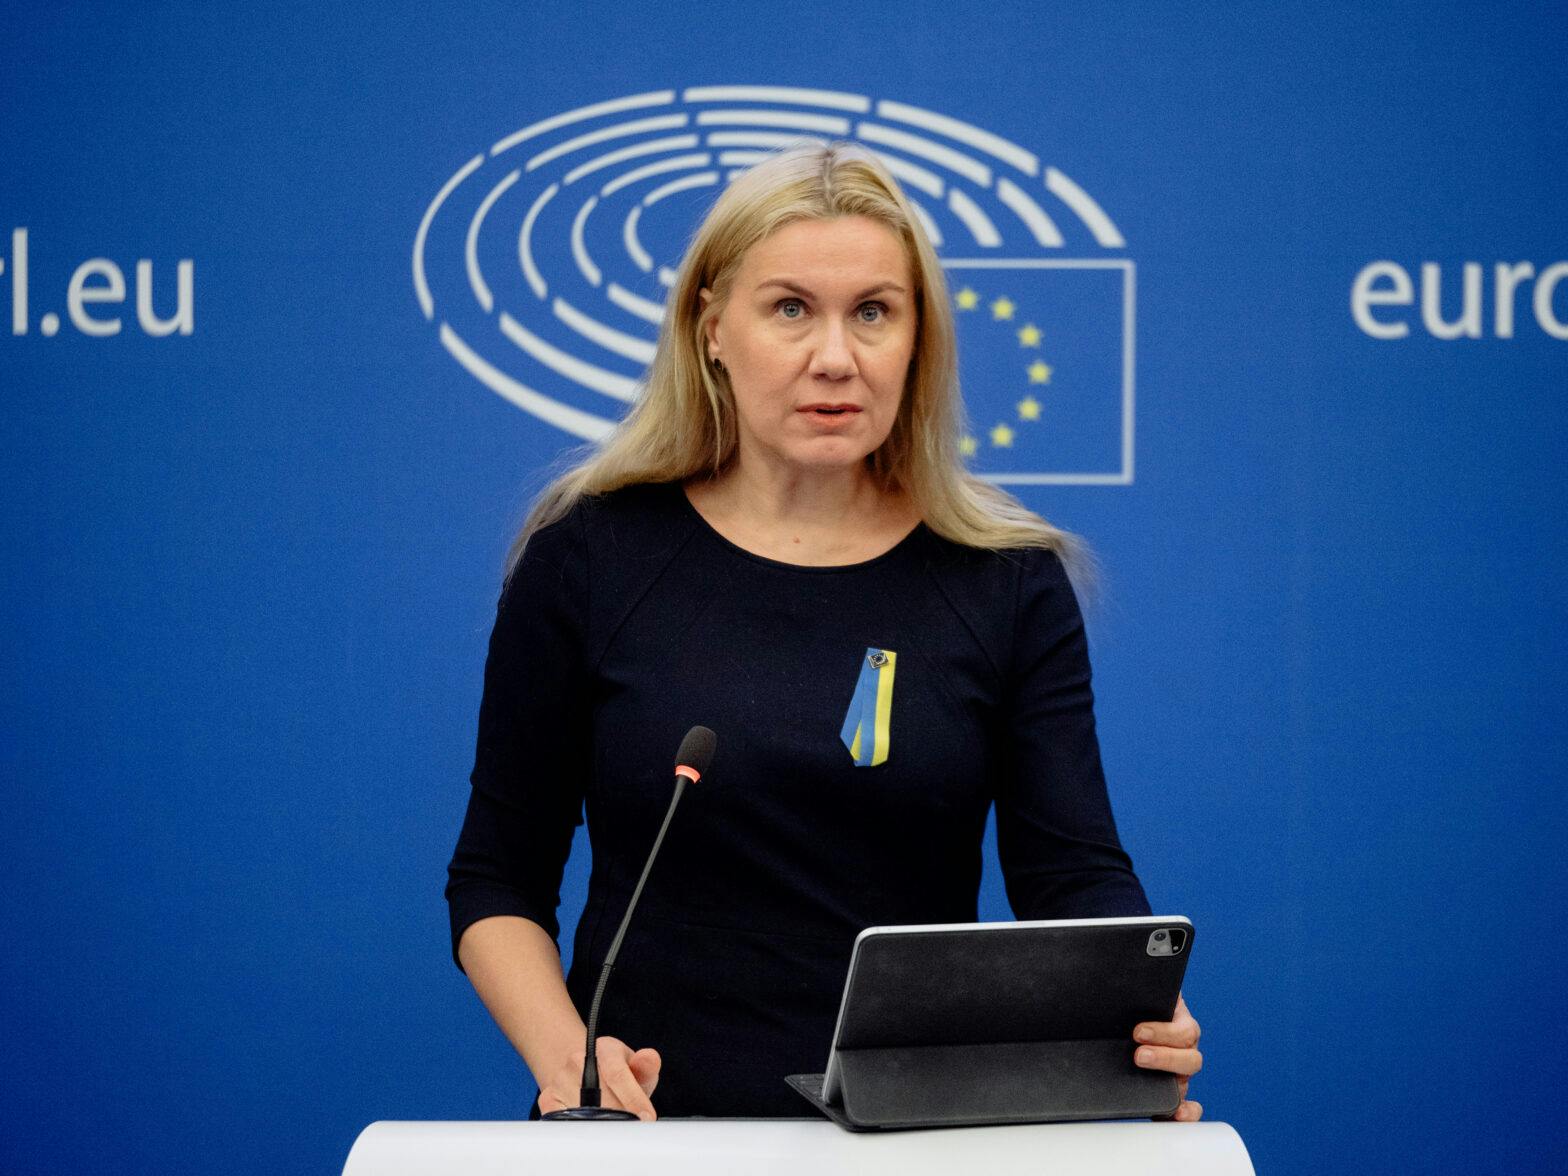 Read-out of the weekly meeting of the von der Leyen Commission by Margaritis Schinas, Vice-President of the European Commission, and Ylva Johansson, European Commissioner, on European integrated border management and mutual recognition of return decisions